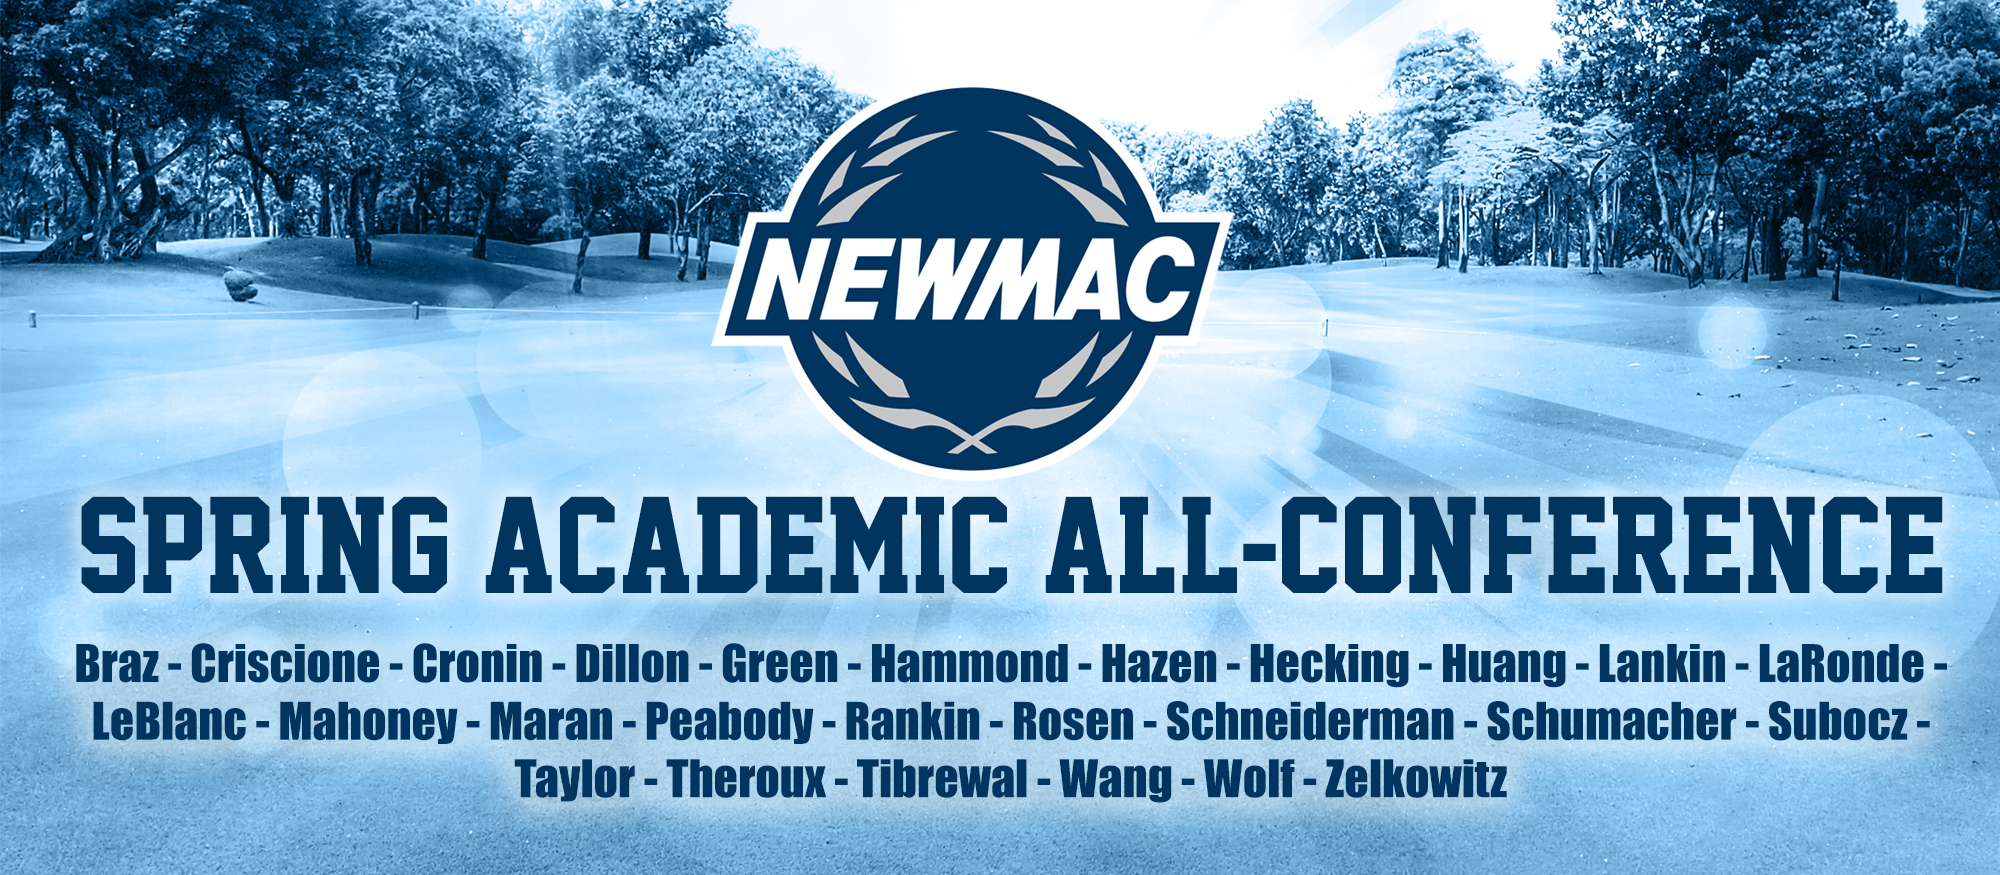 Graphic depicting the 26 student-athletes named to the 2018 NEWMAC Spring Academic All-Conference Team.